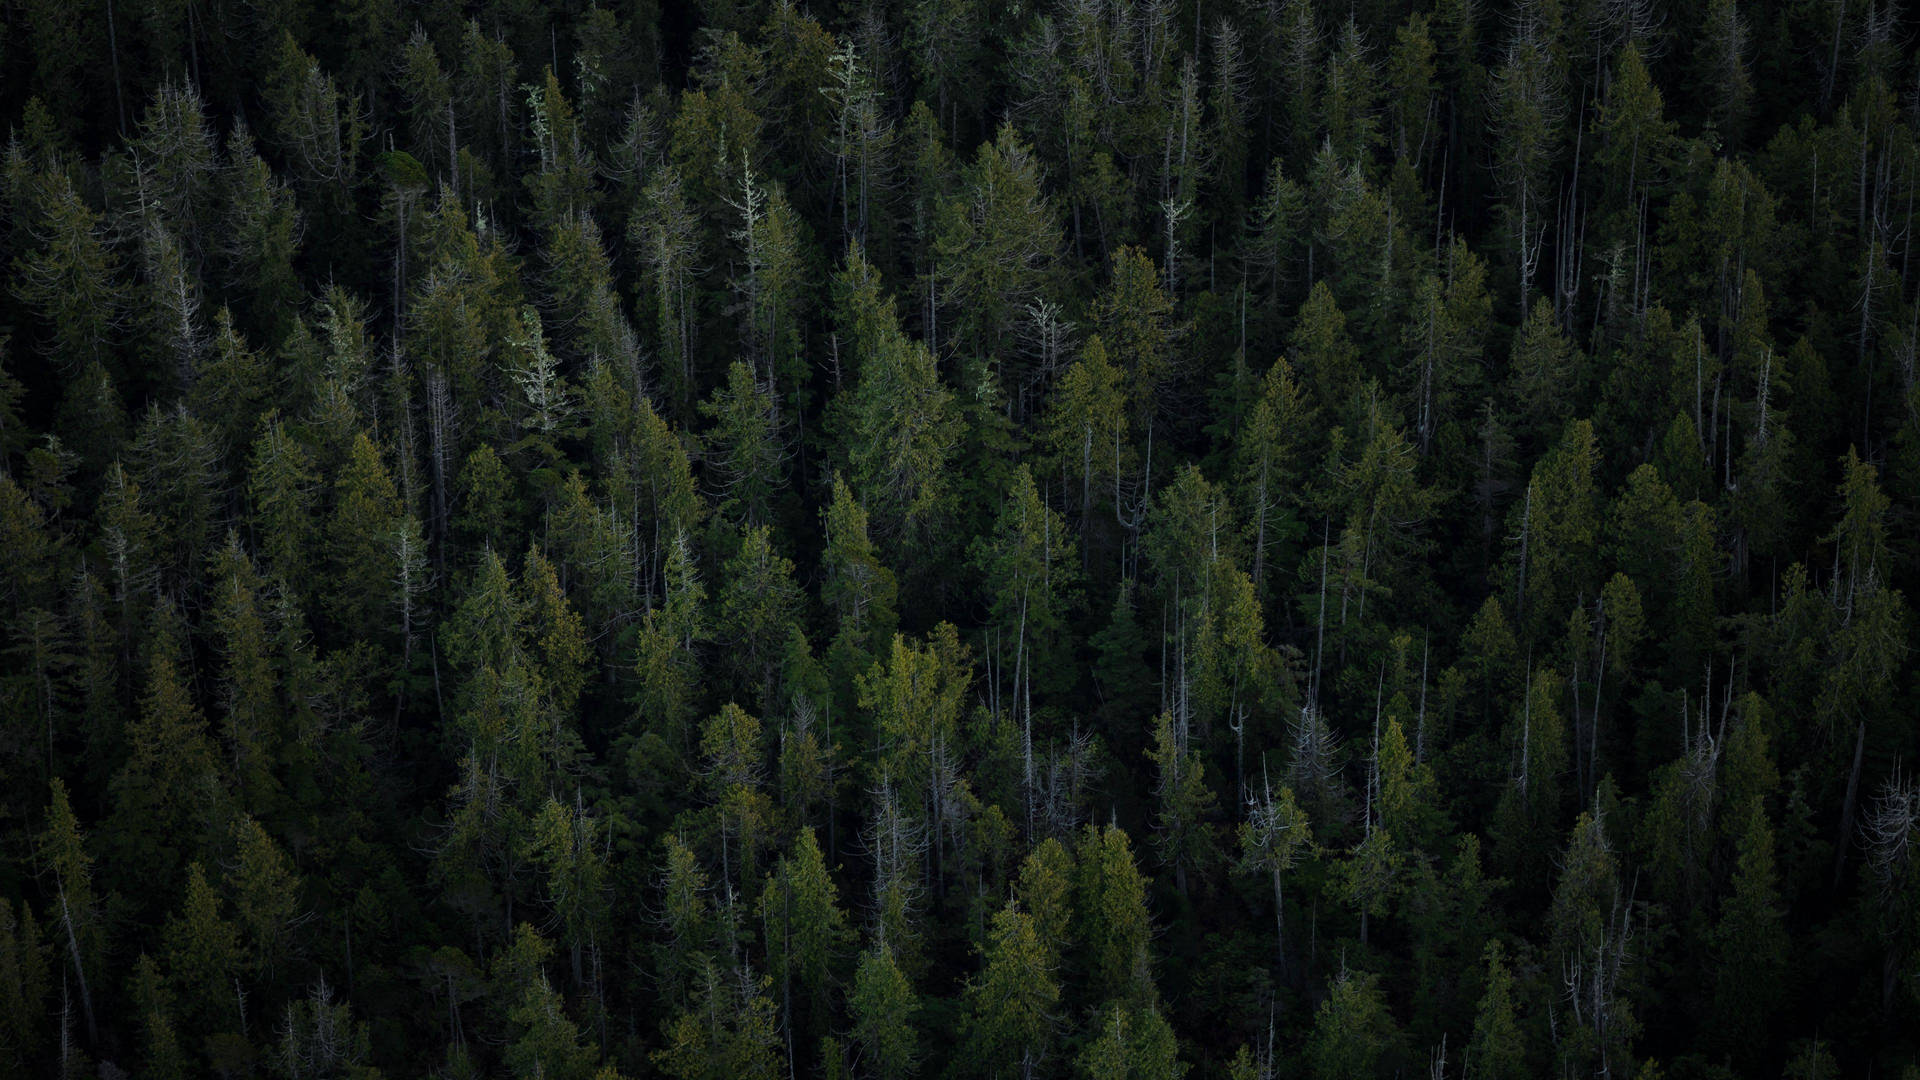 Free 4k Forest Wallpaper Downloads, [100+] 4k Forest Wallpapers for FREE |  